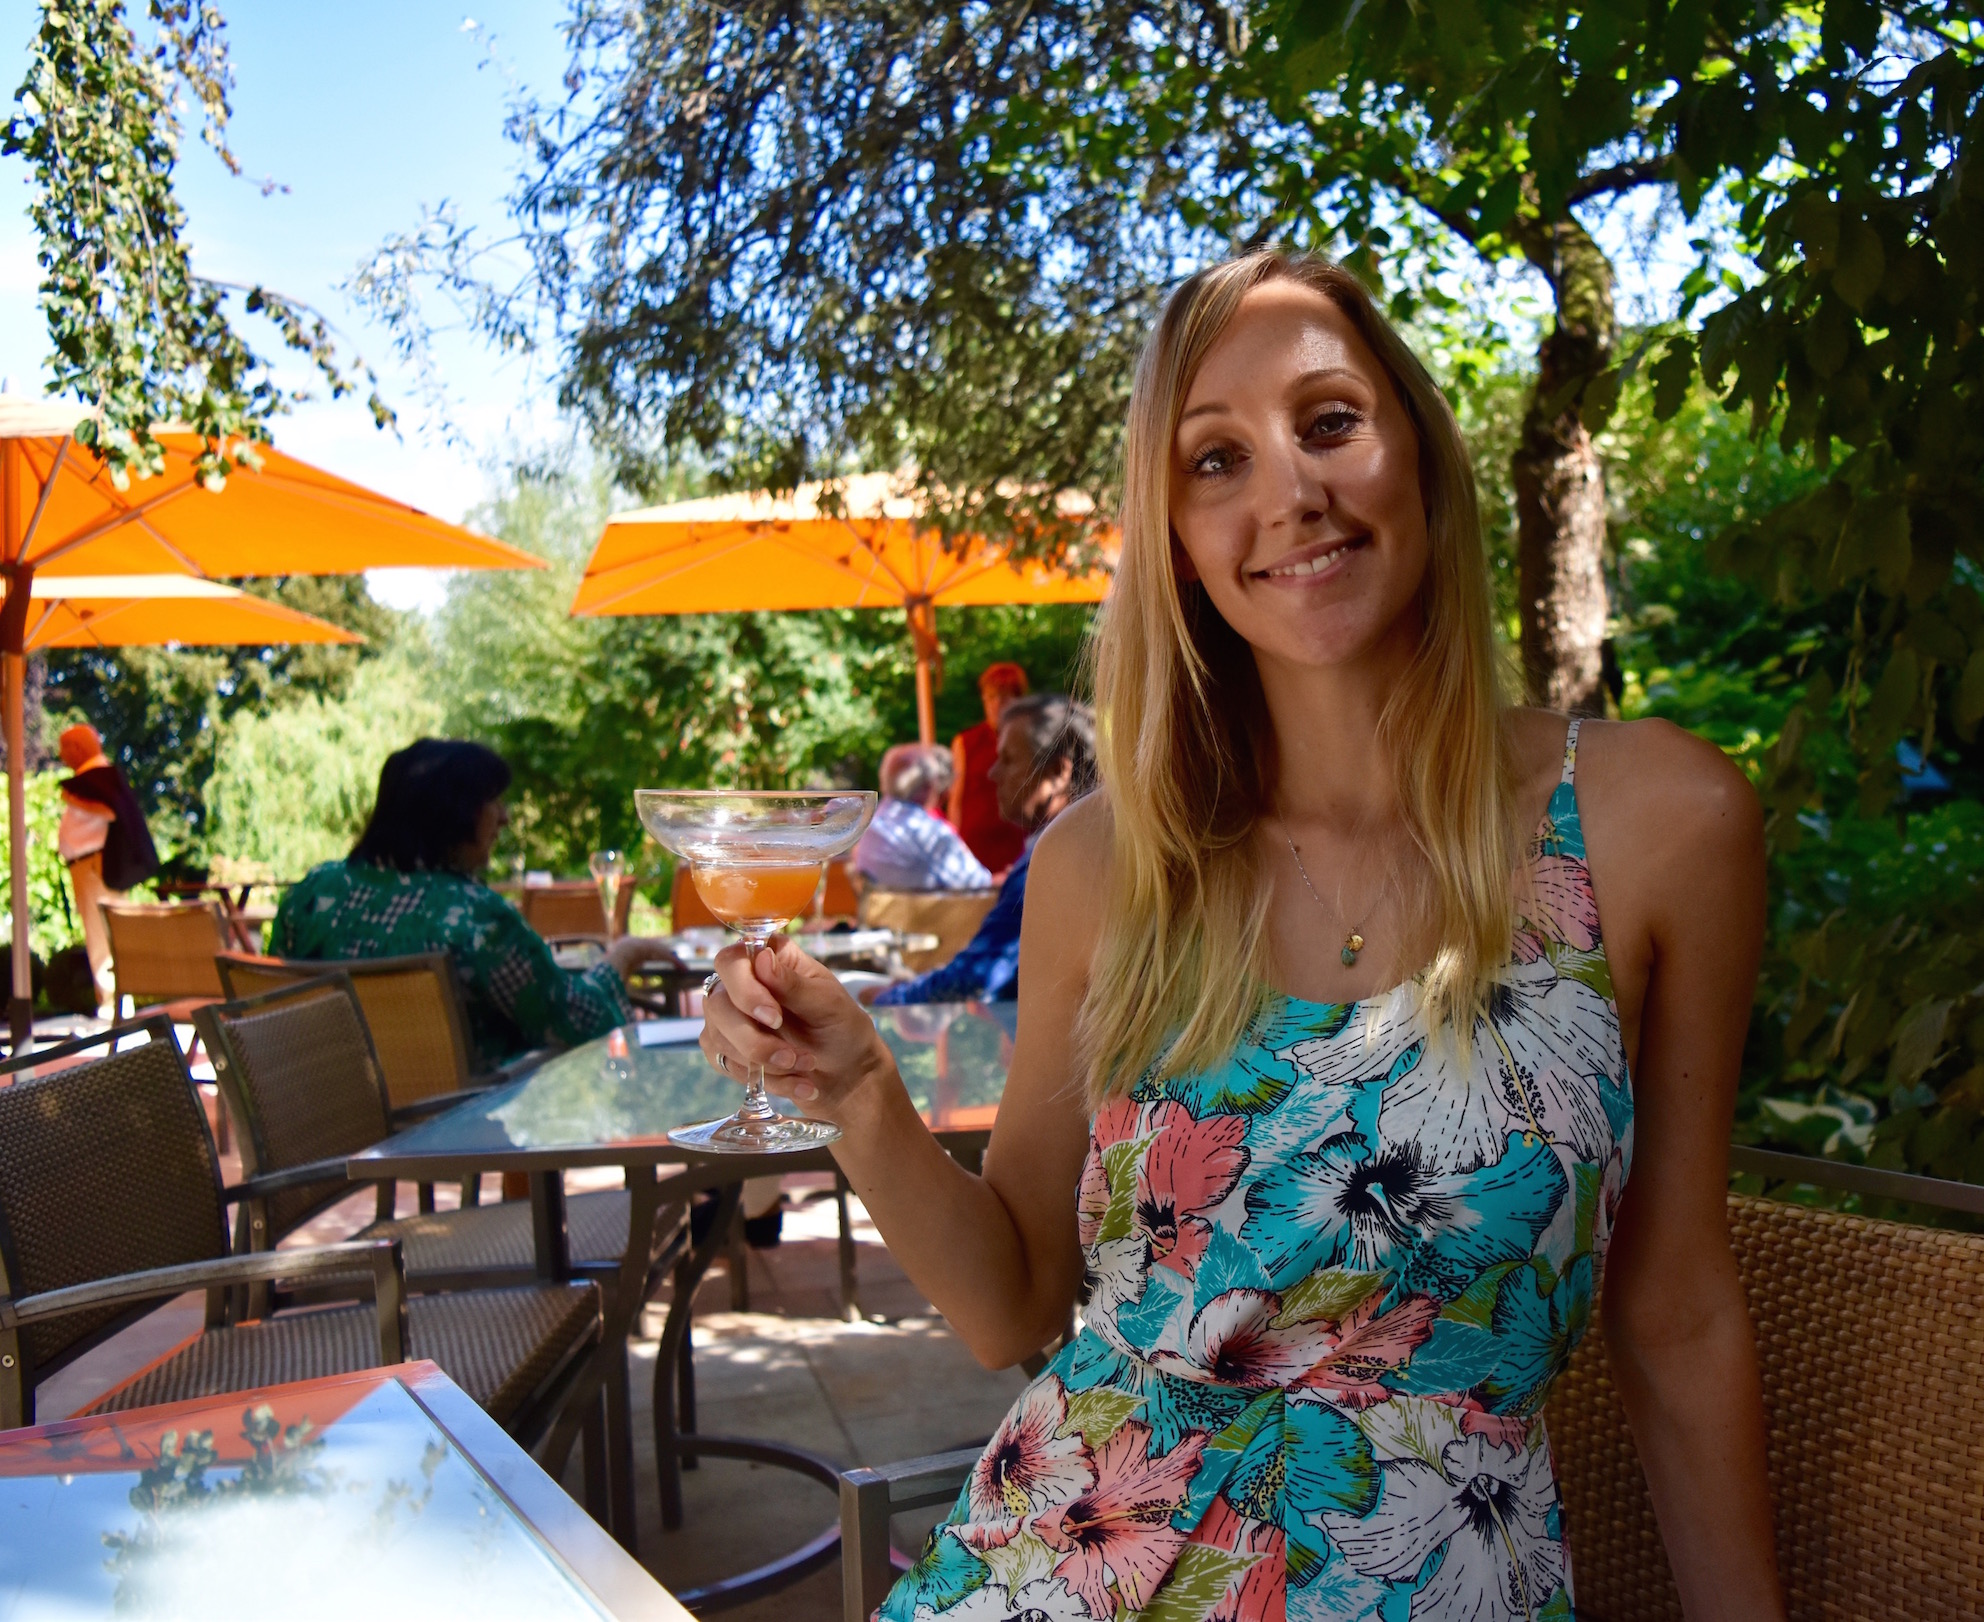 Hayley with a cocktail in a restaurant garden